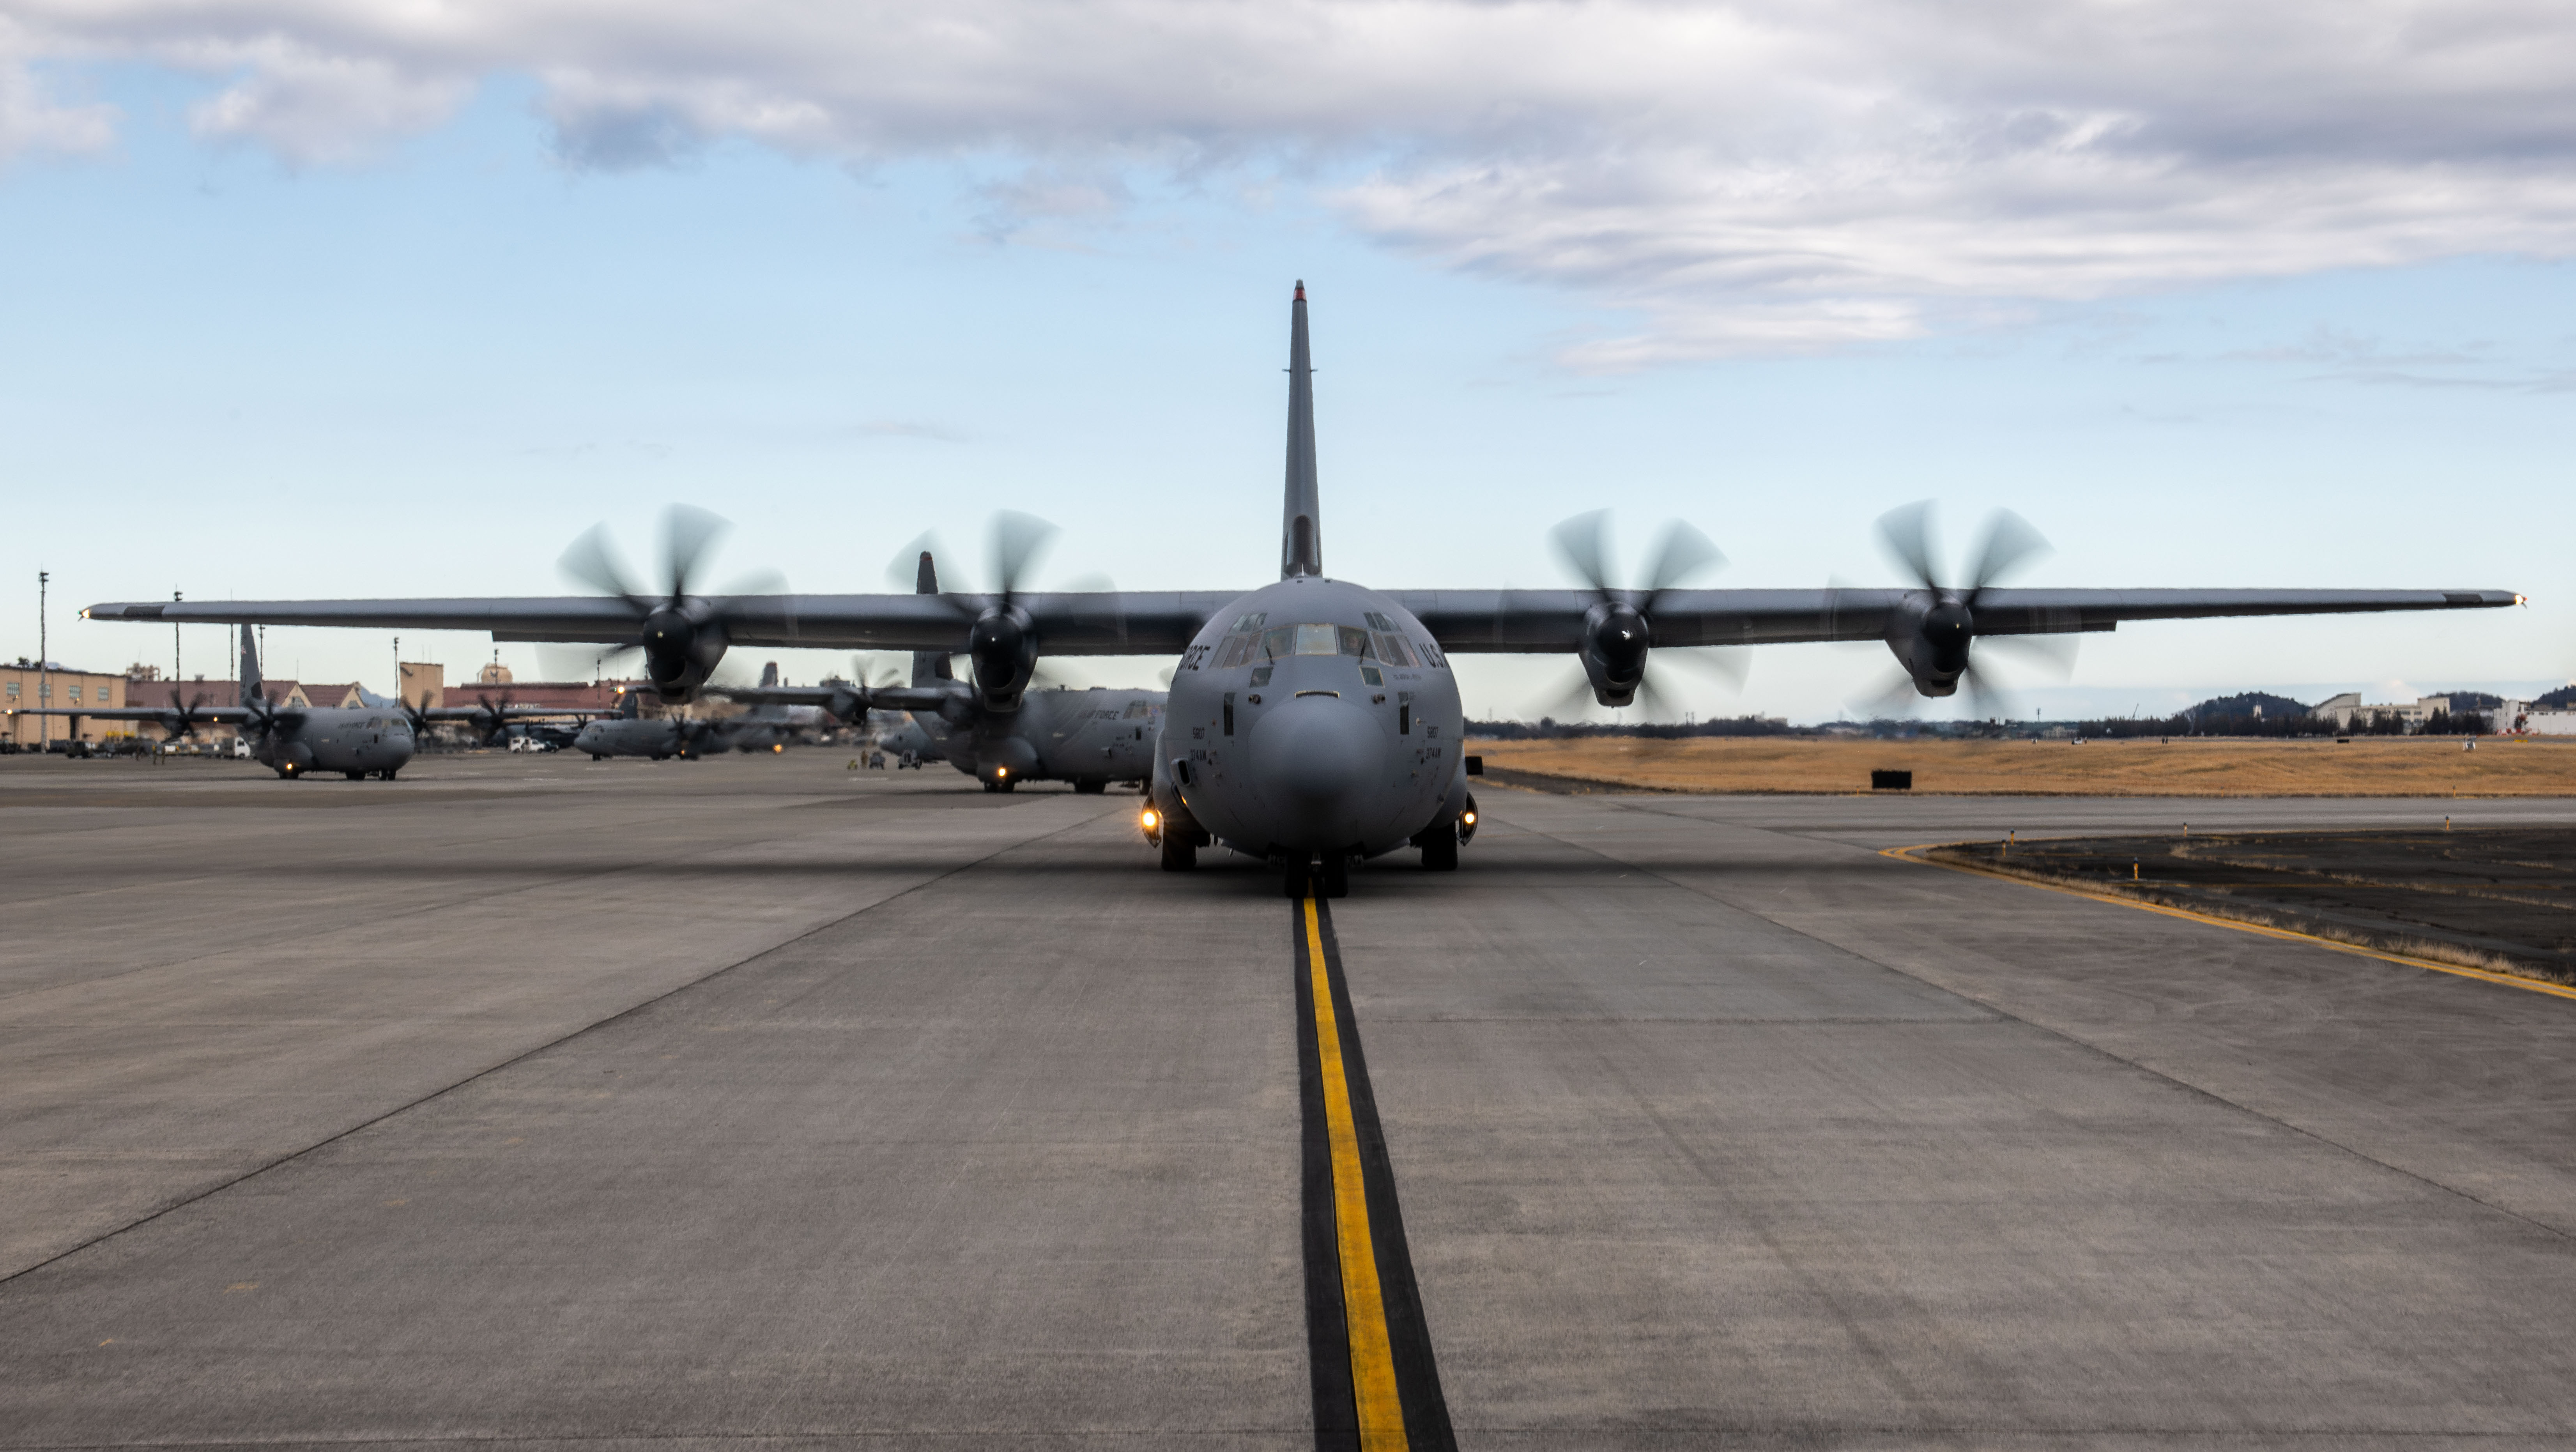 Six C-130Js taxi on the flightline to conduct training operations for static-line jump training during Airborne 24